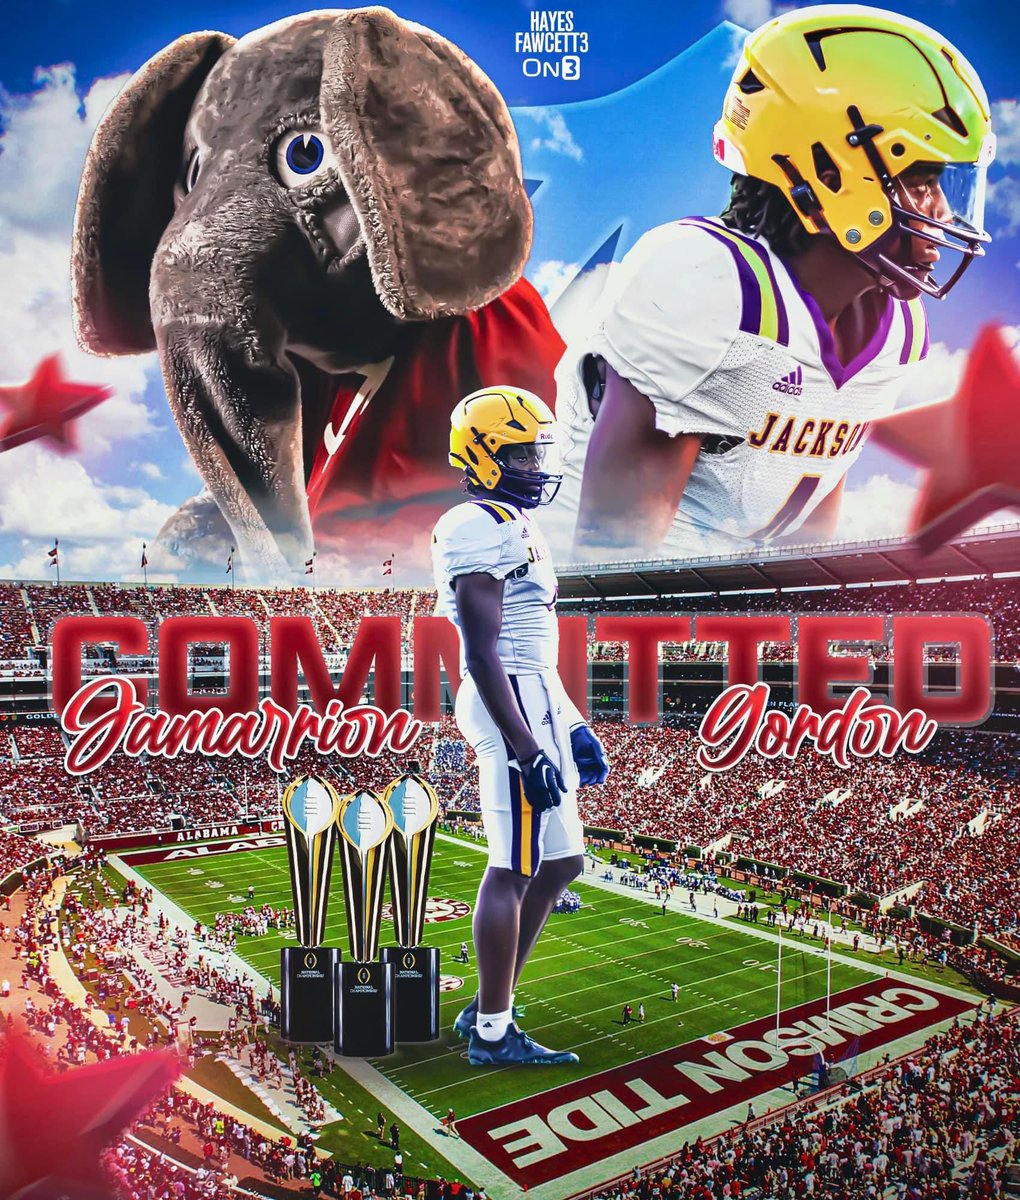 #AGTG I’m staying home to make this state better! With that being said IM 100% COMMITTED TO THE UNIVERSTY OF ALABAMA 🐘🔴⚪️ @AlabamaFTBL ‼️@CoachMoLinguist @JacksonFootball @FlournoyCody 🧃

#ROLLTIDE🐘